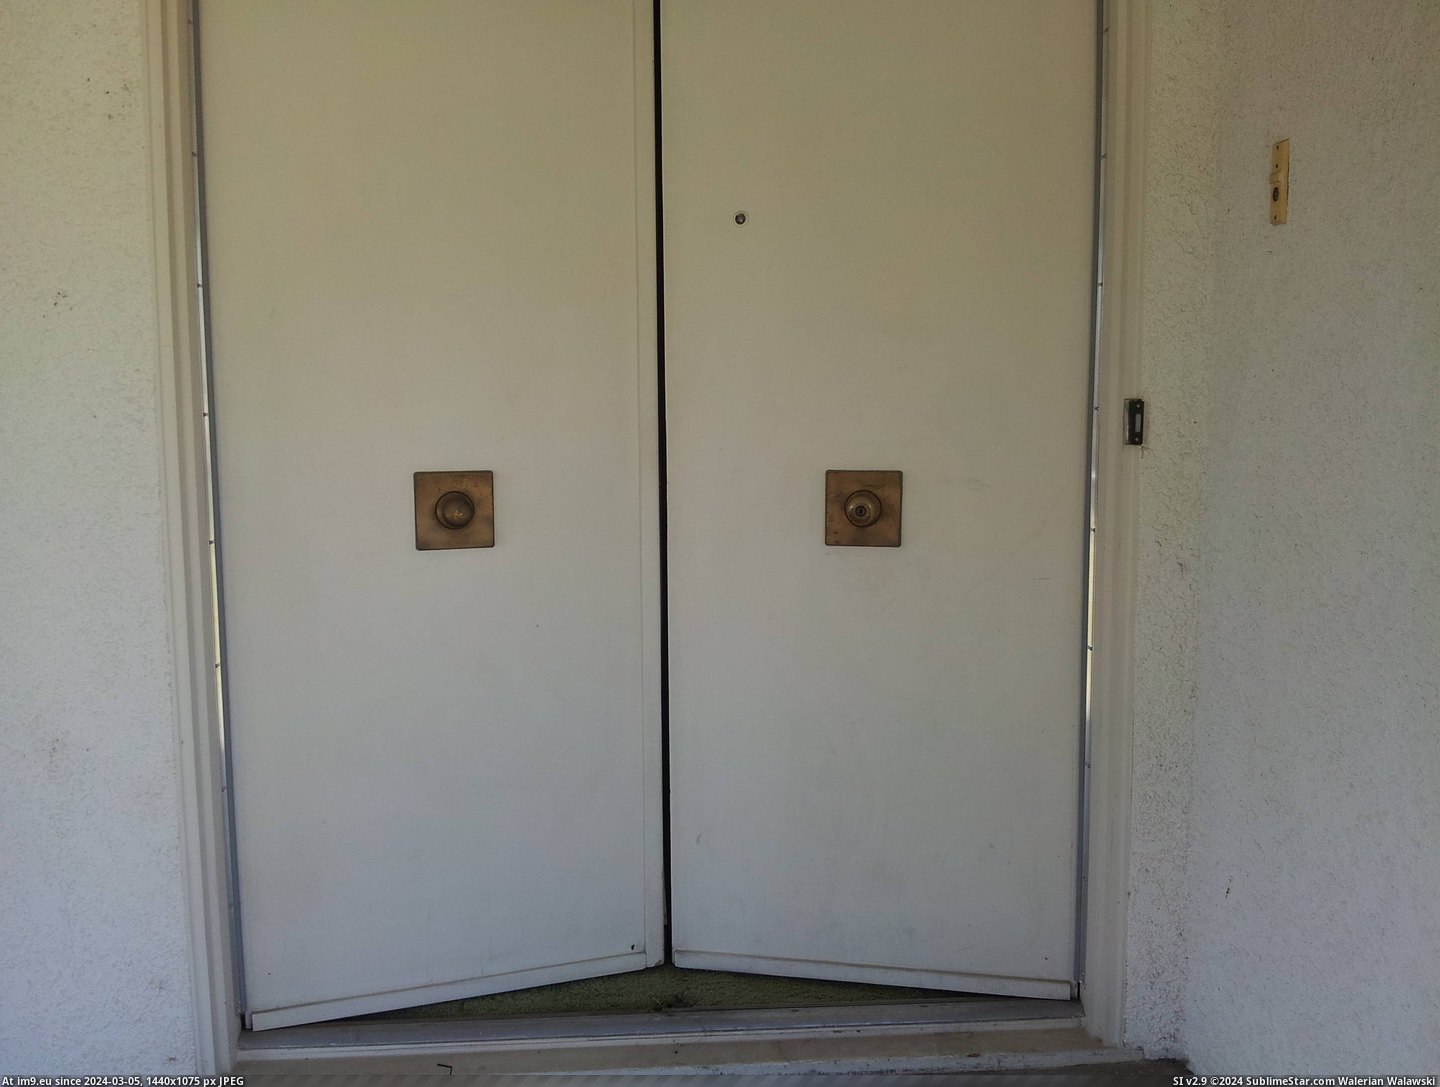 #Sister #House #Knobs #Door #Moved [Mildlyinteresting] My sister just moved into a house with door knobs in the middle of the door. 1 Pic. (Изображение из альбом My r/MILDLYINTERESTING favs))